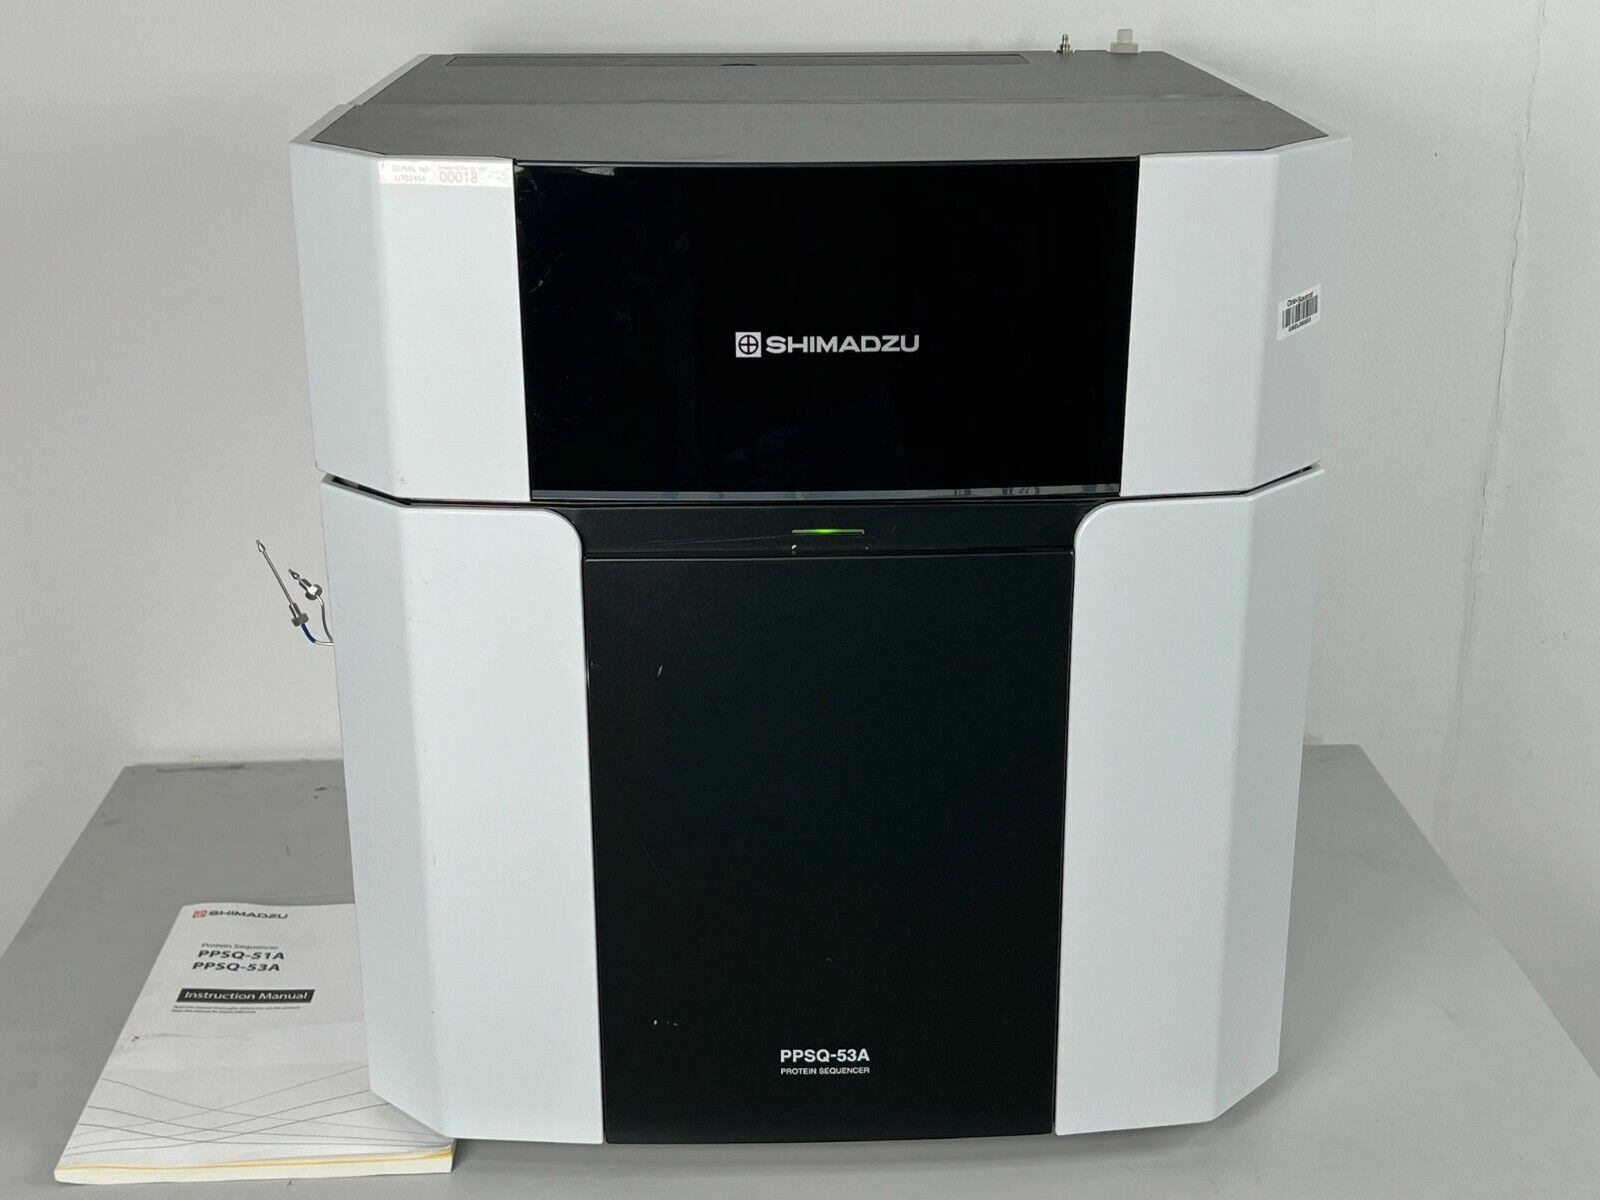 Shimadzu Protein Sequencer PPSQ-53A HPLC LCMS 3-re